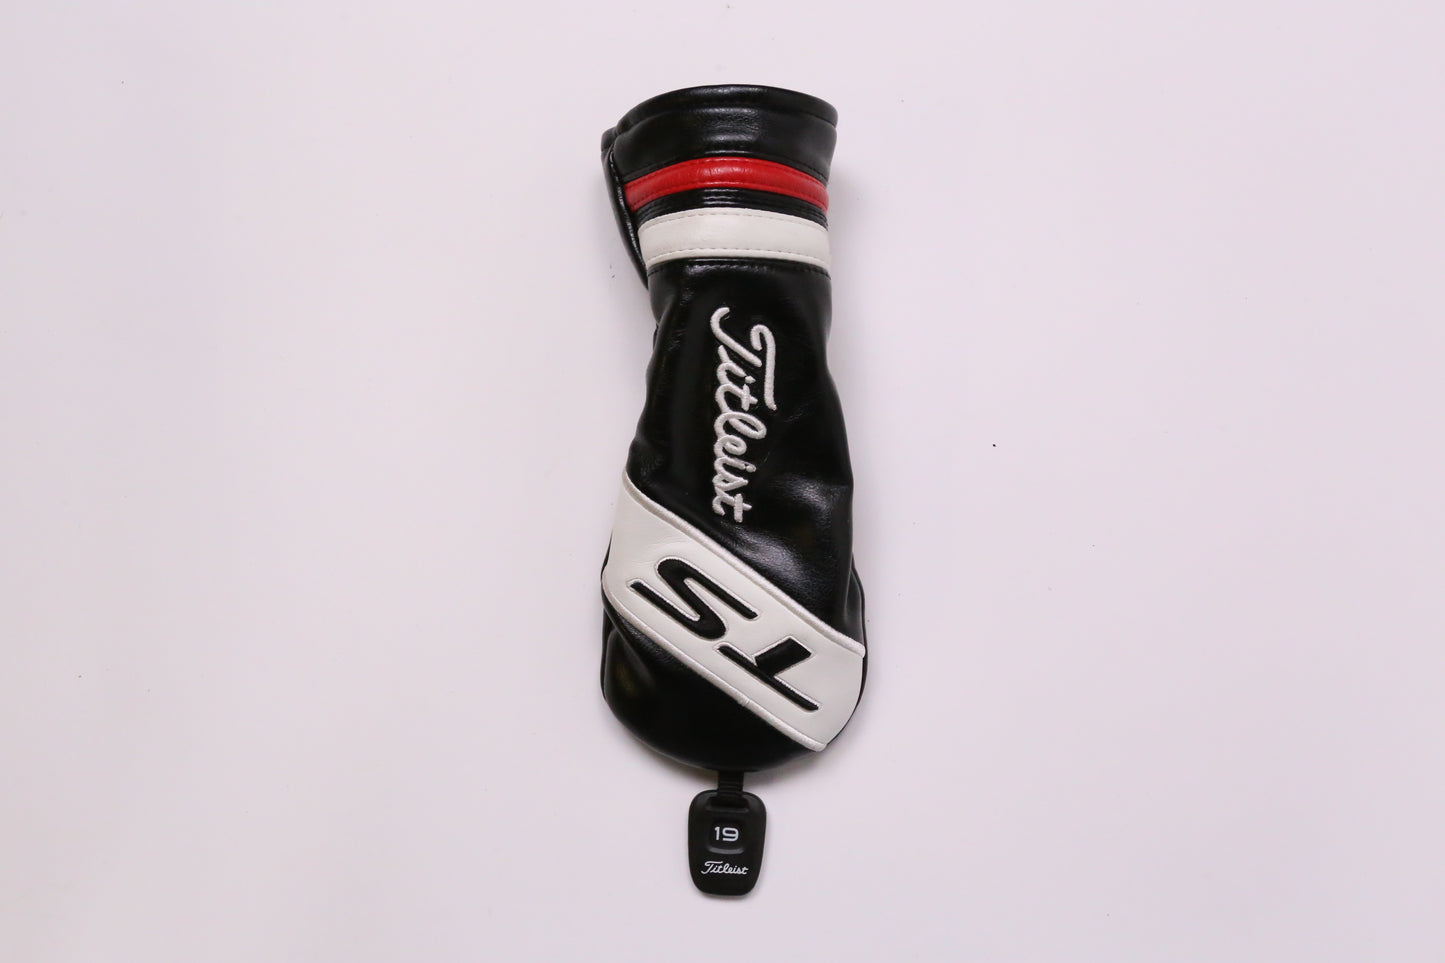 Titleist TS Hybrid Headcover Only Black Very Good Condition